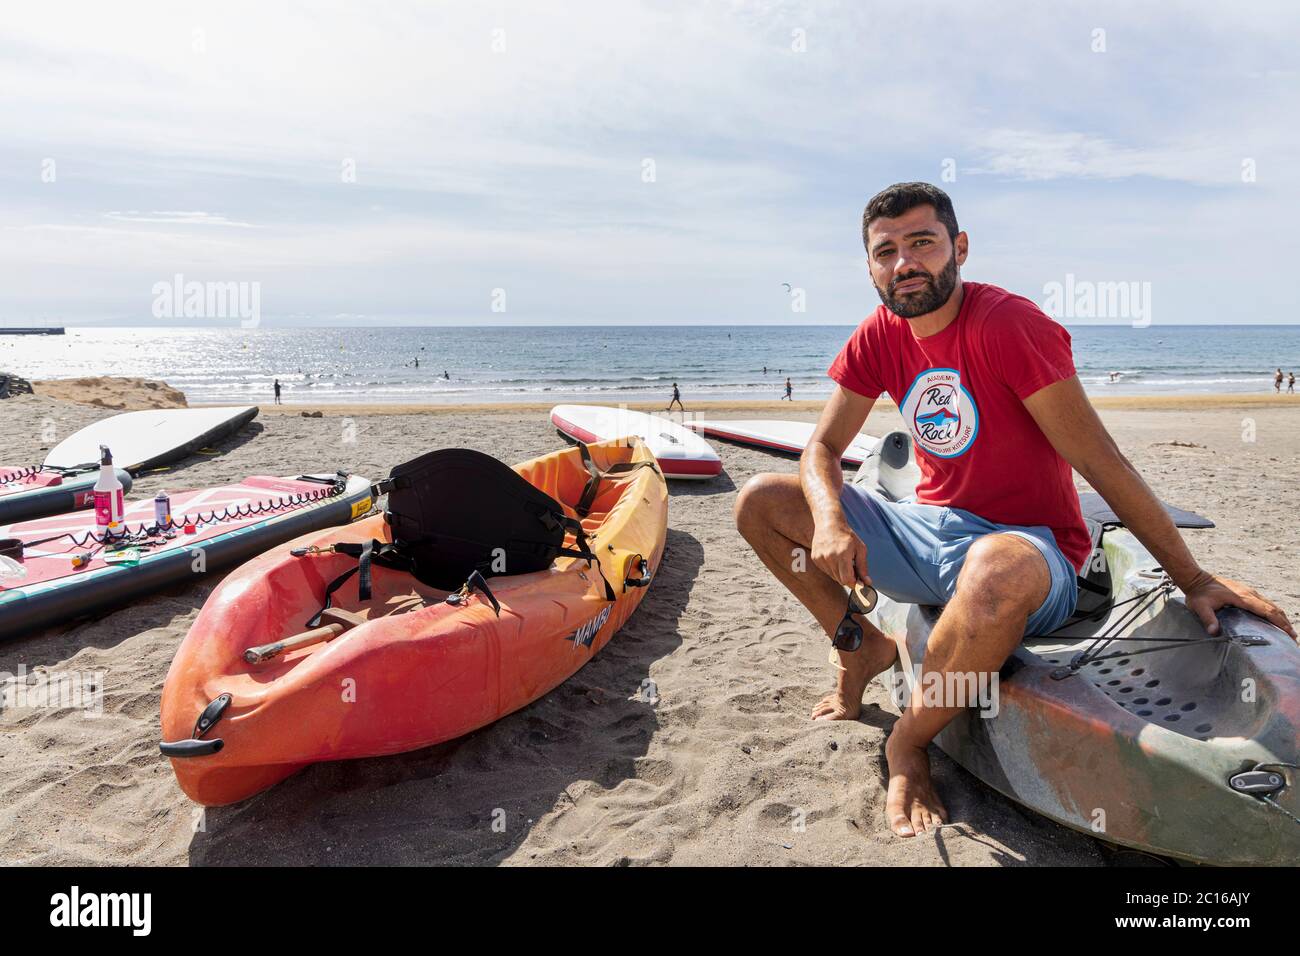 Local residents have the beach to themselves as the weather hots up for summer. Owner at Red Rock Surf prepares kayaks for hire. Phase 3 de-escalation Stock Photo